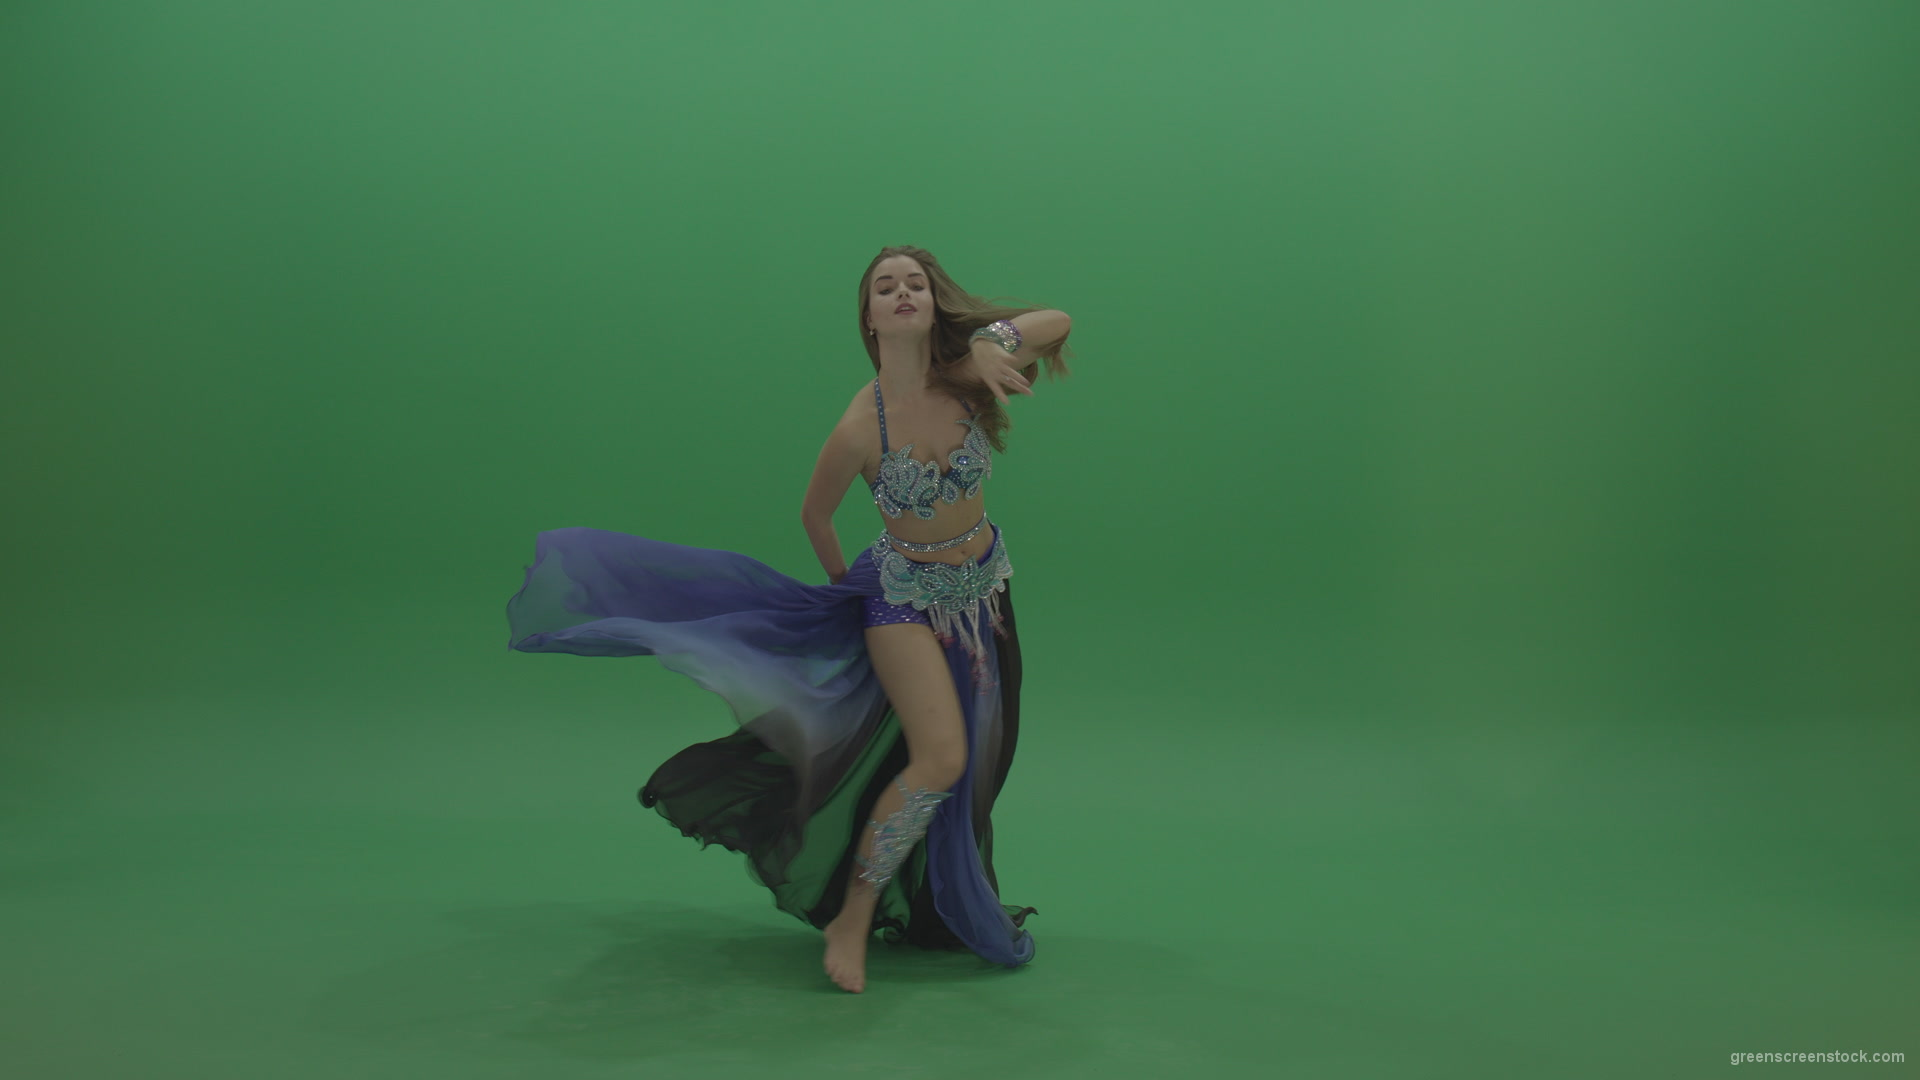 Splendid-belly-dancer-in-purple-and-black-wear-display-amazing-dance-moves-over-chromakey-background_007 Green Screen Stock